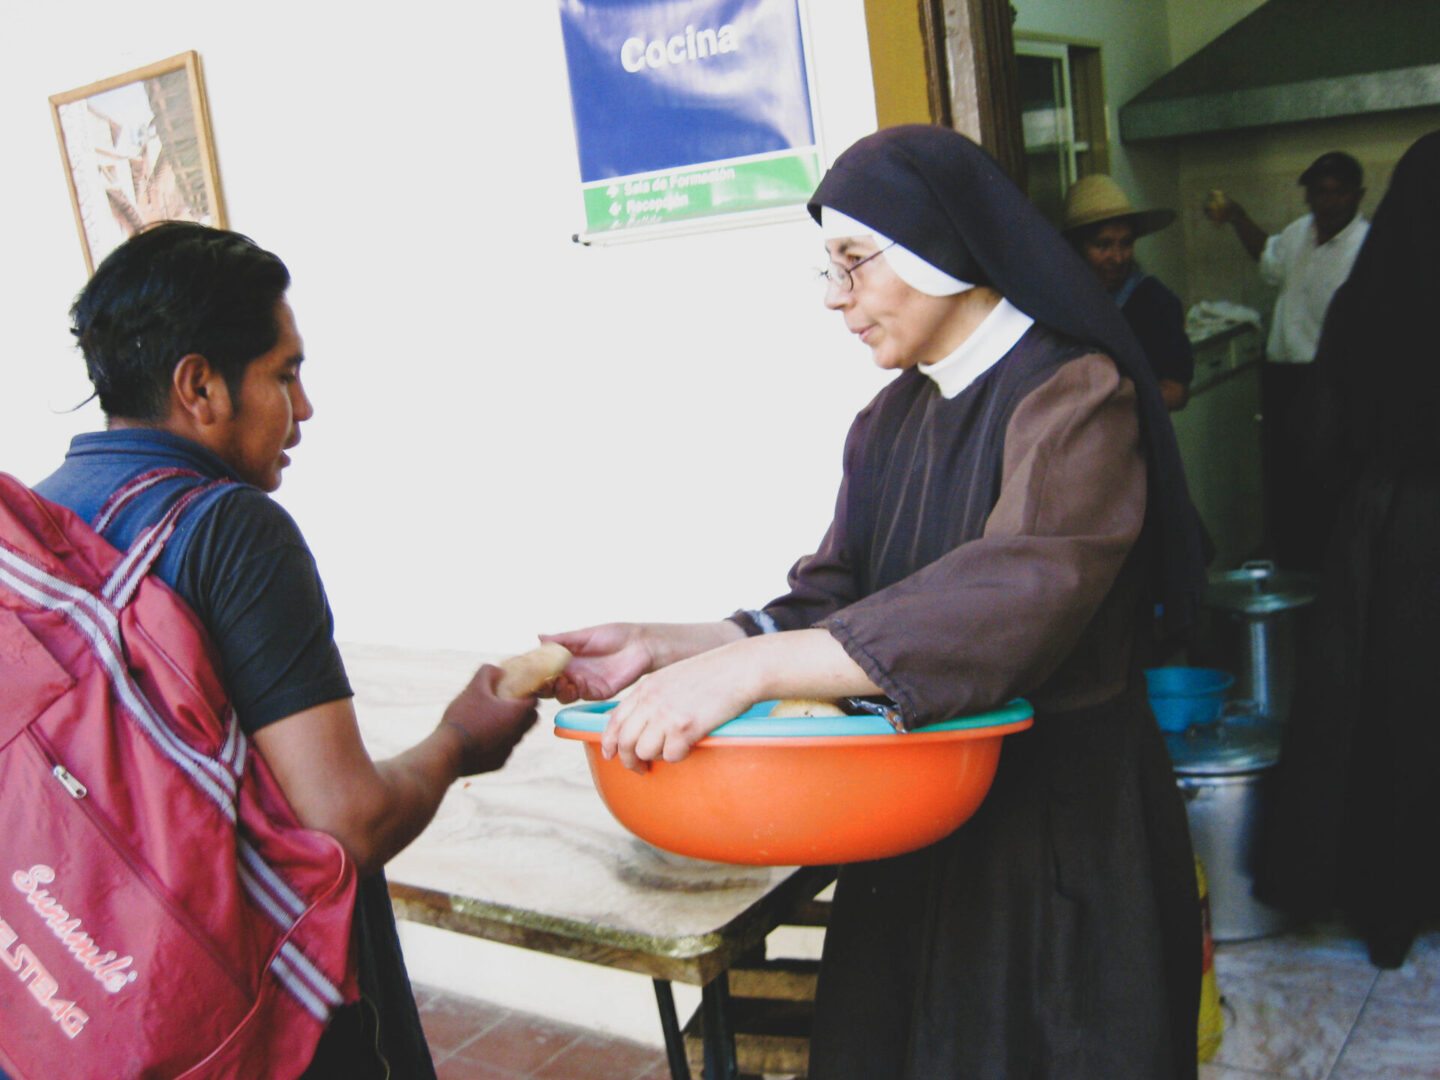 A catholic sister giving food to the person wearing a bag